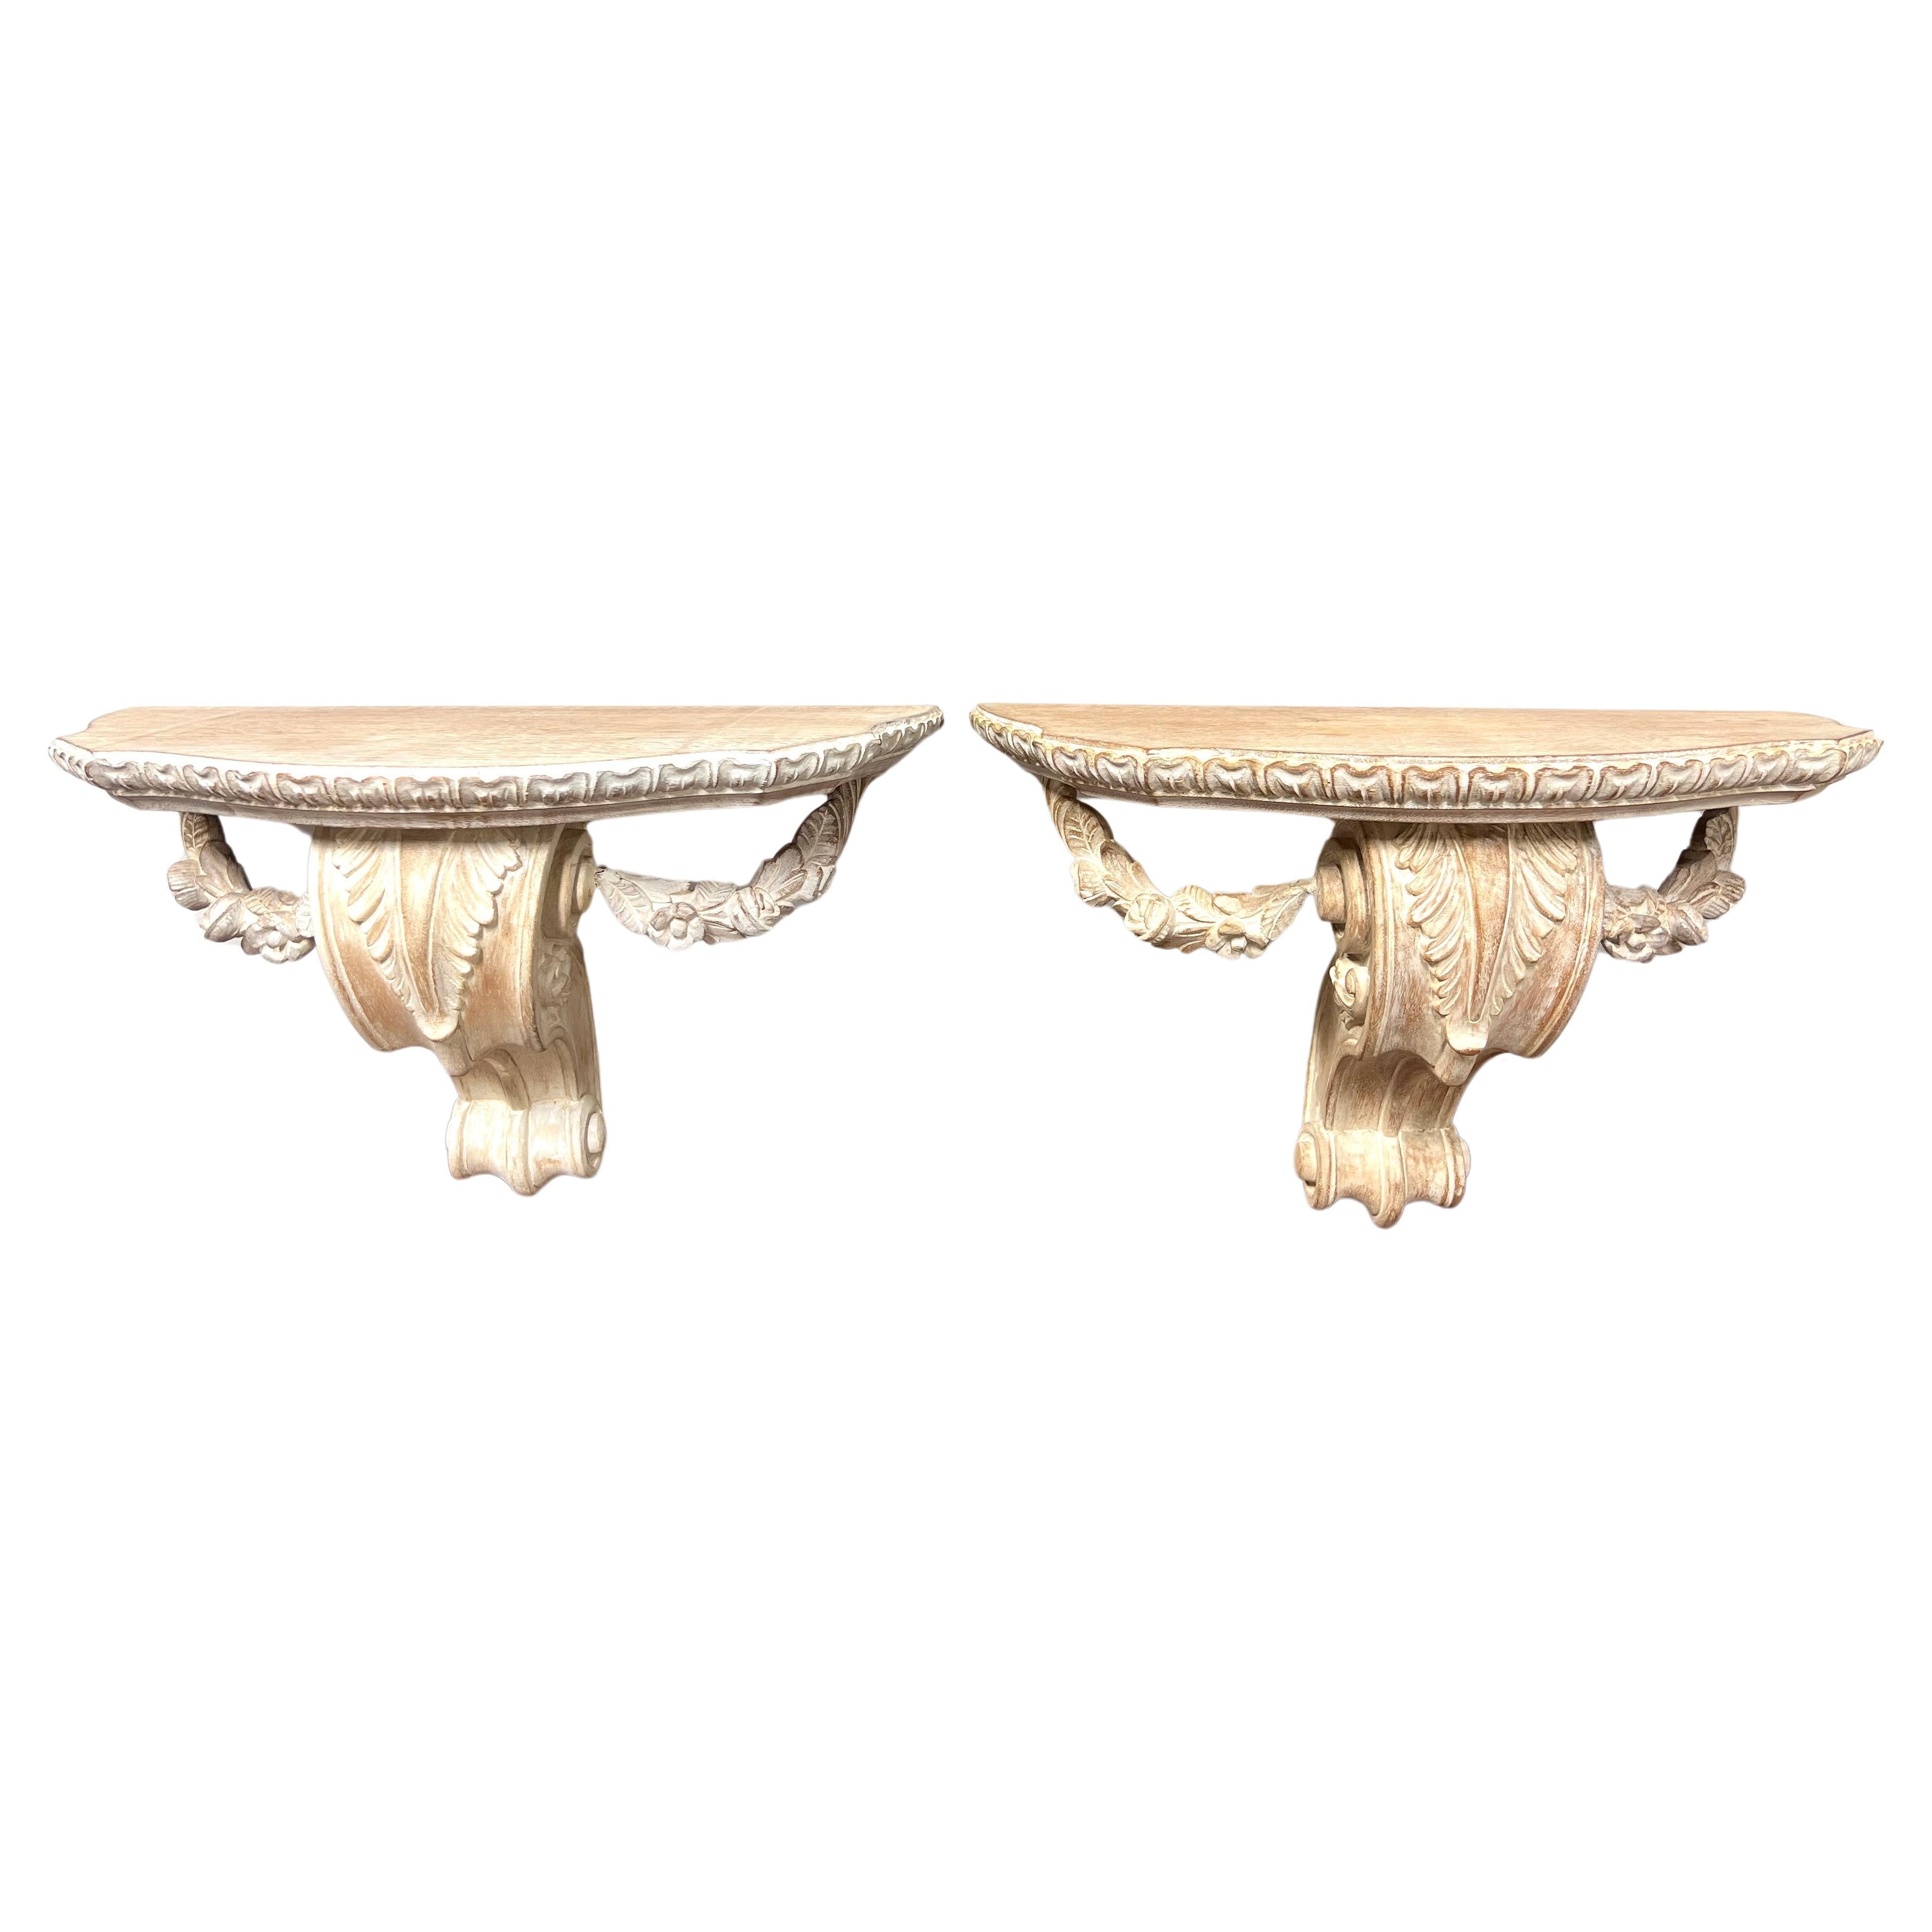 1980's Carved Whitewashed Wood Wall Bracket Shelves - Pair For Sale